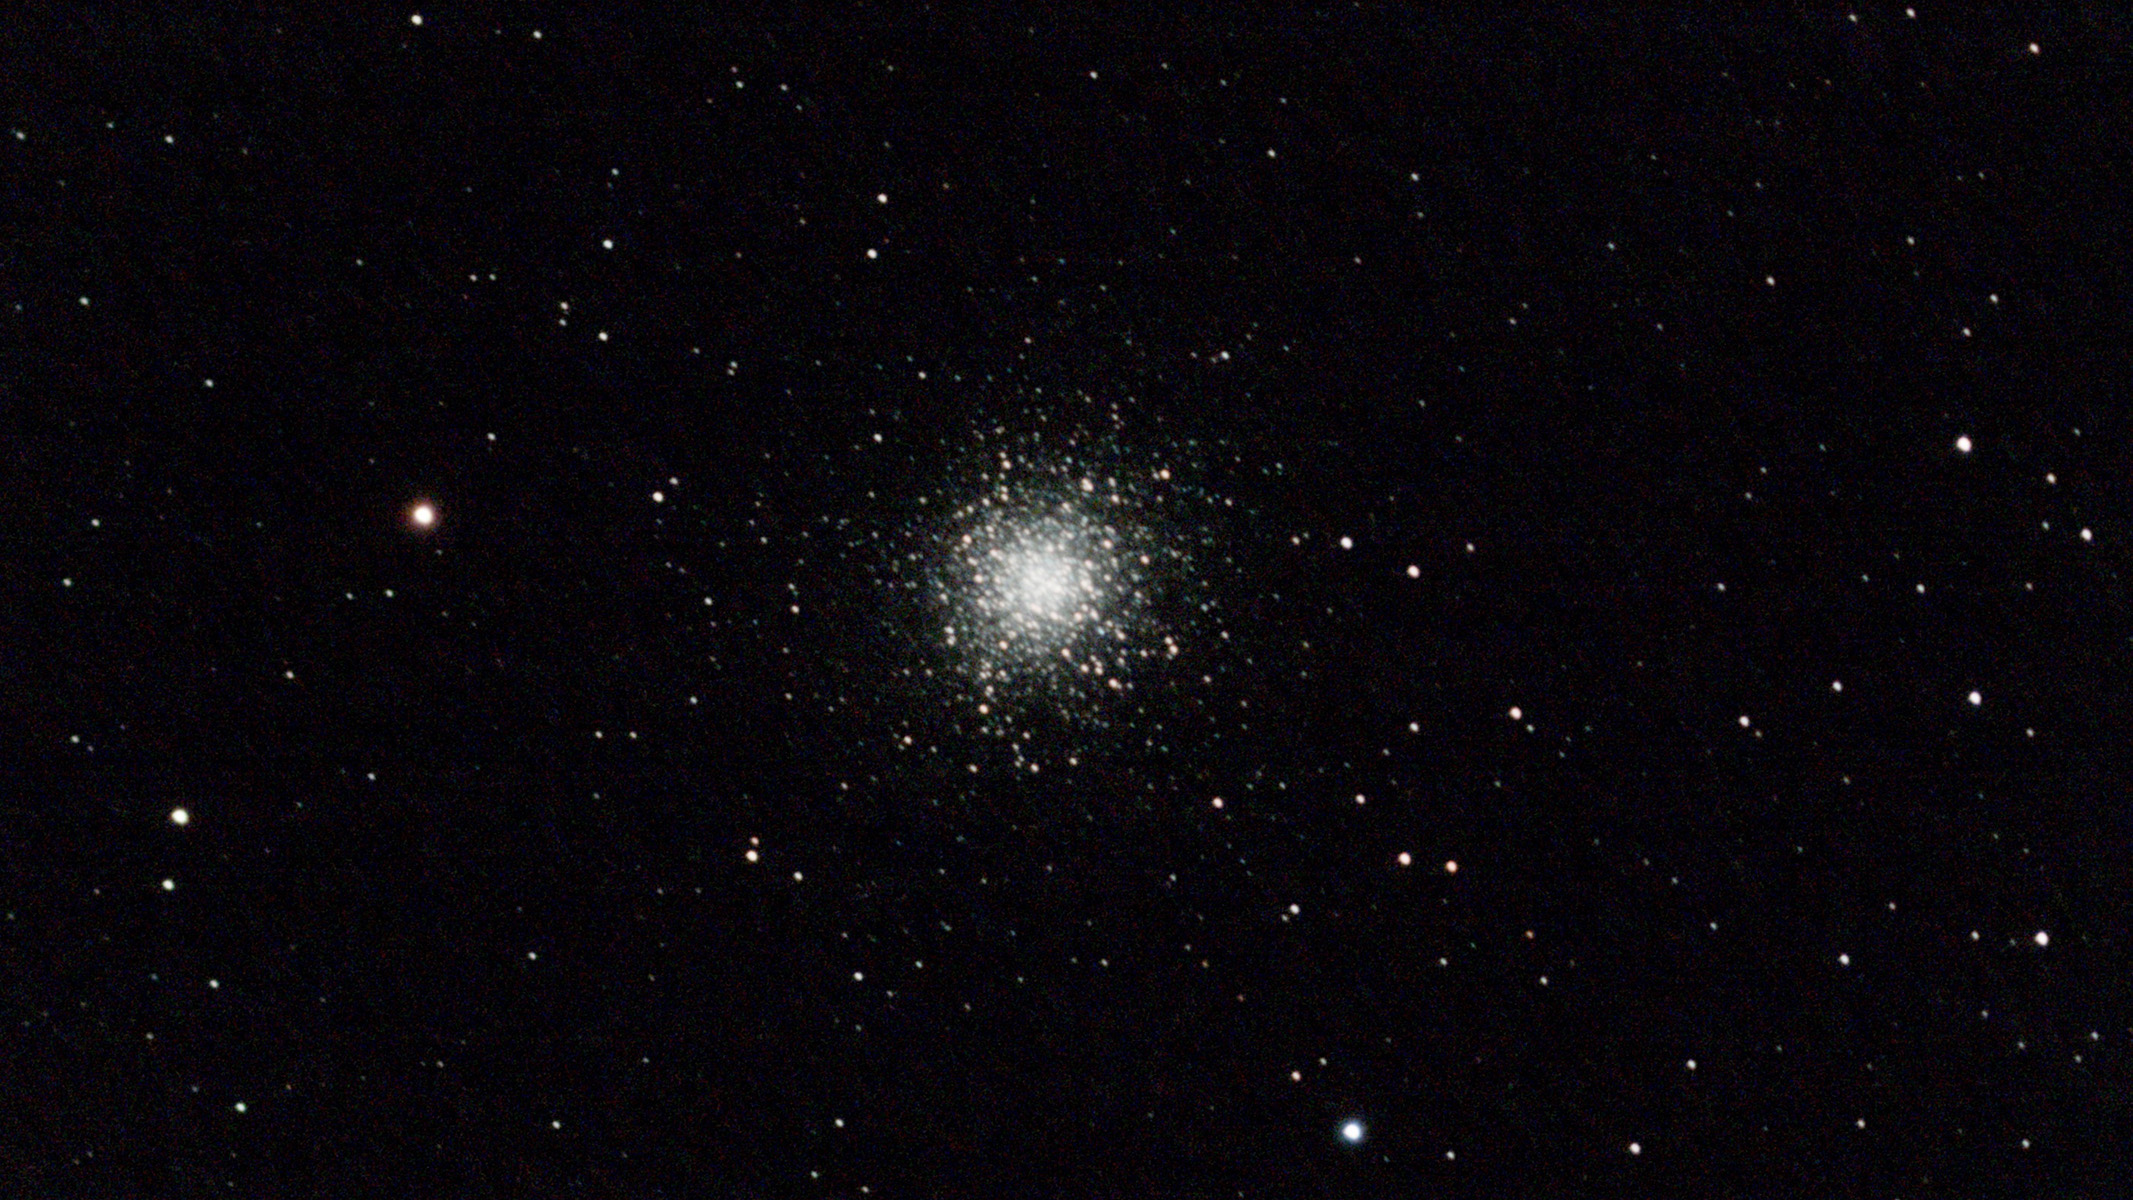 Image of the Hercules star cluster taken with Vaonis Stellina